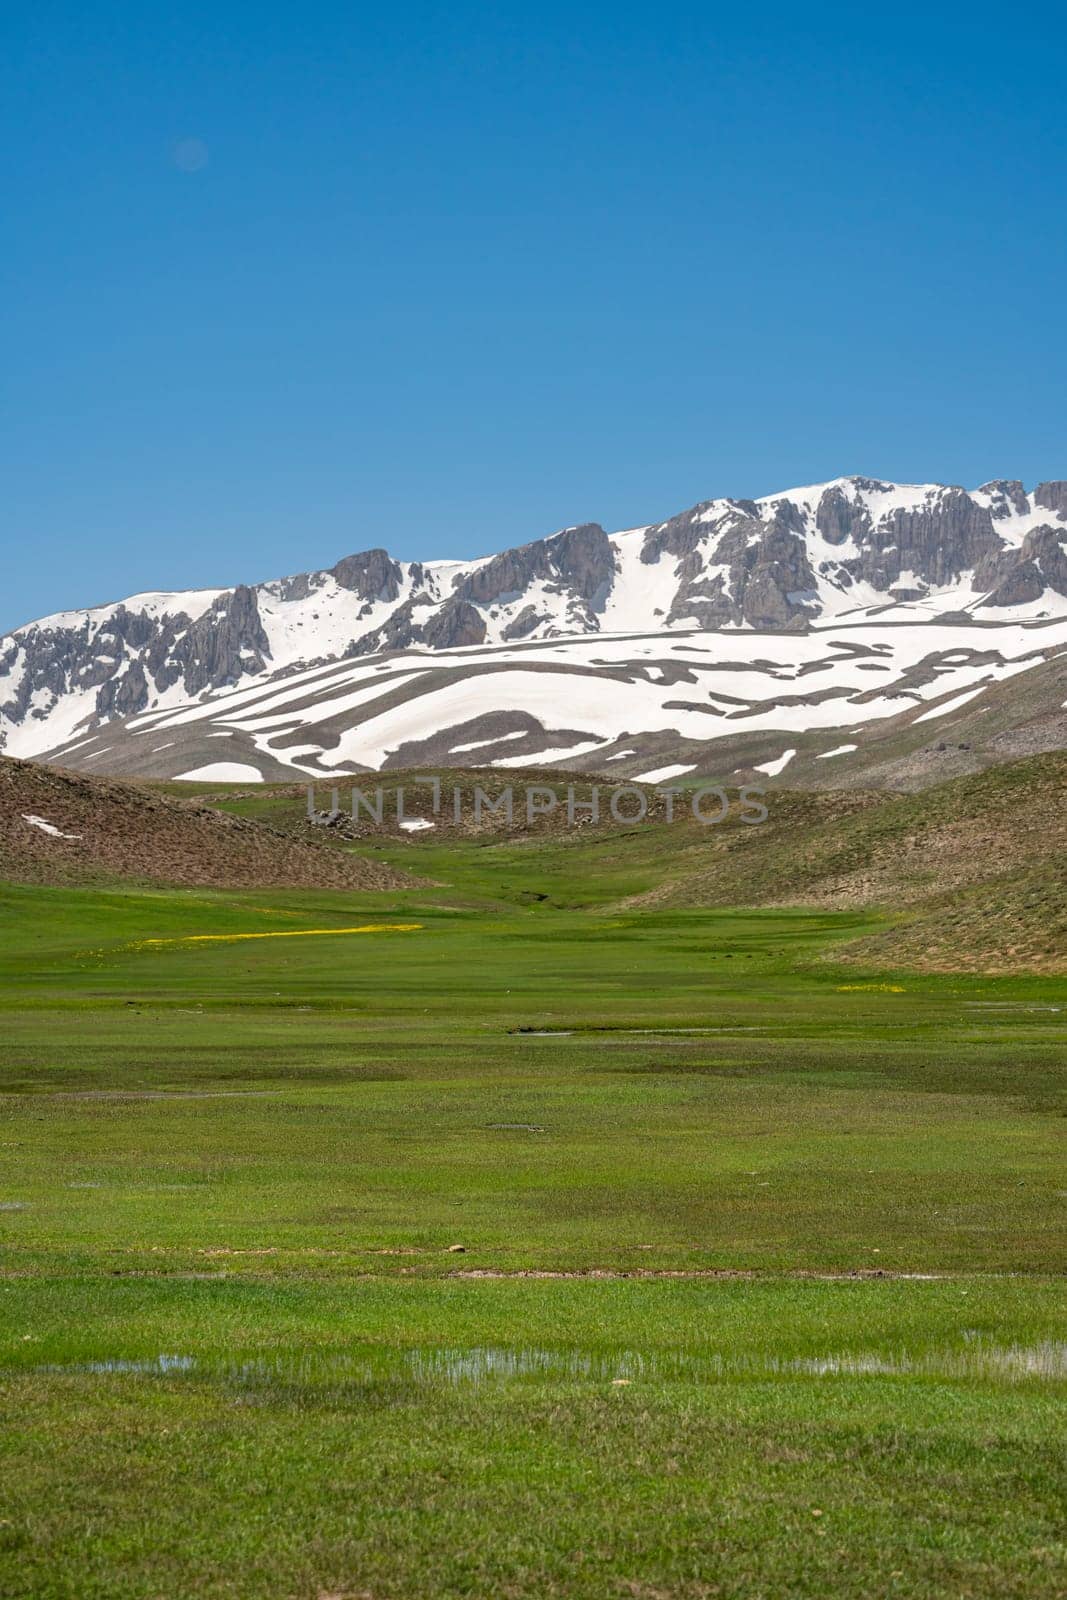 The lush green Sobucimen plateau in spring and the mountains with some melted snow behind.